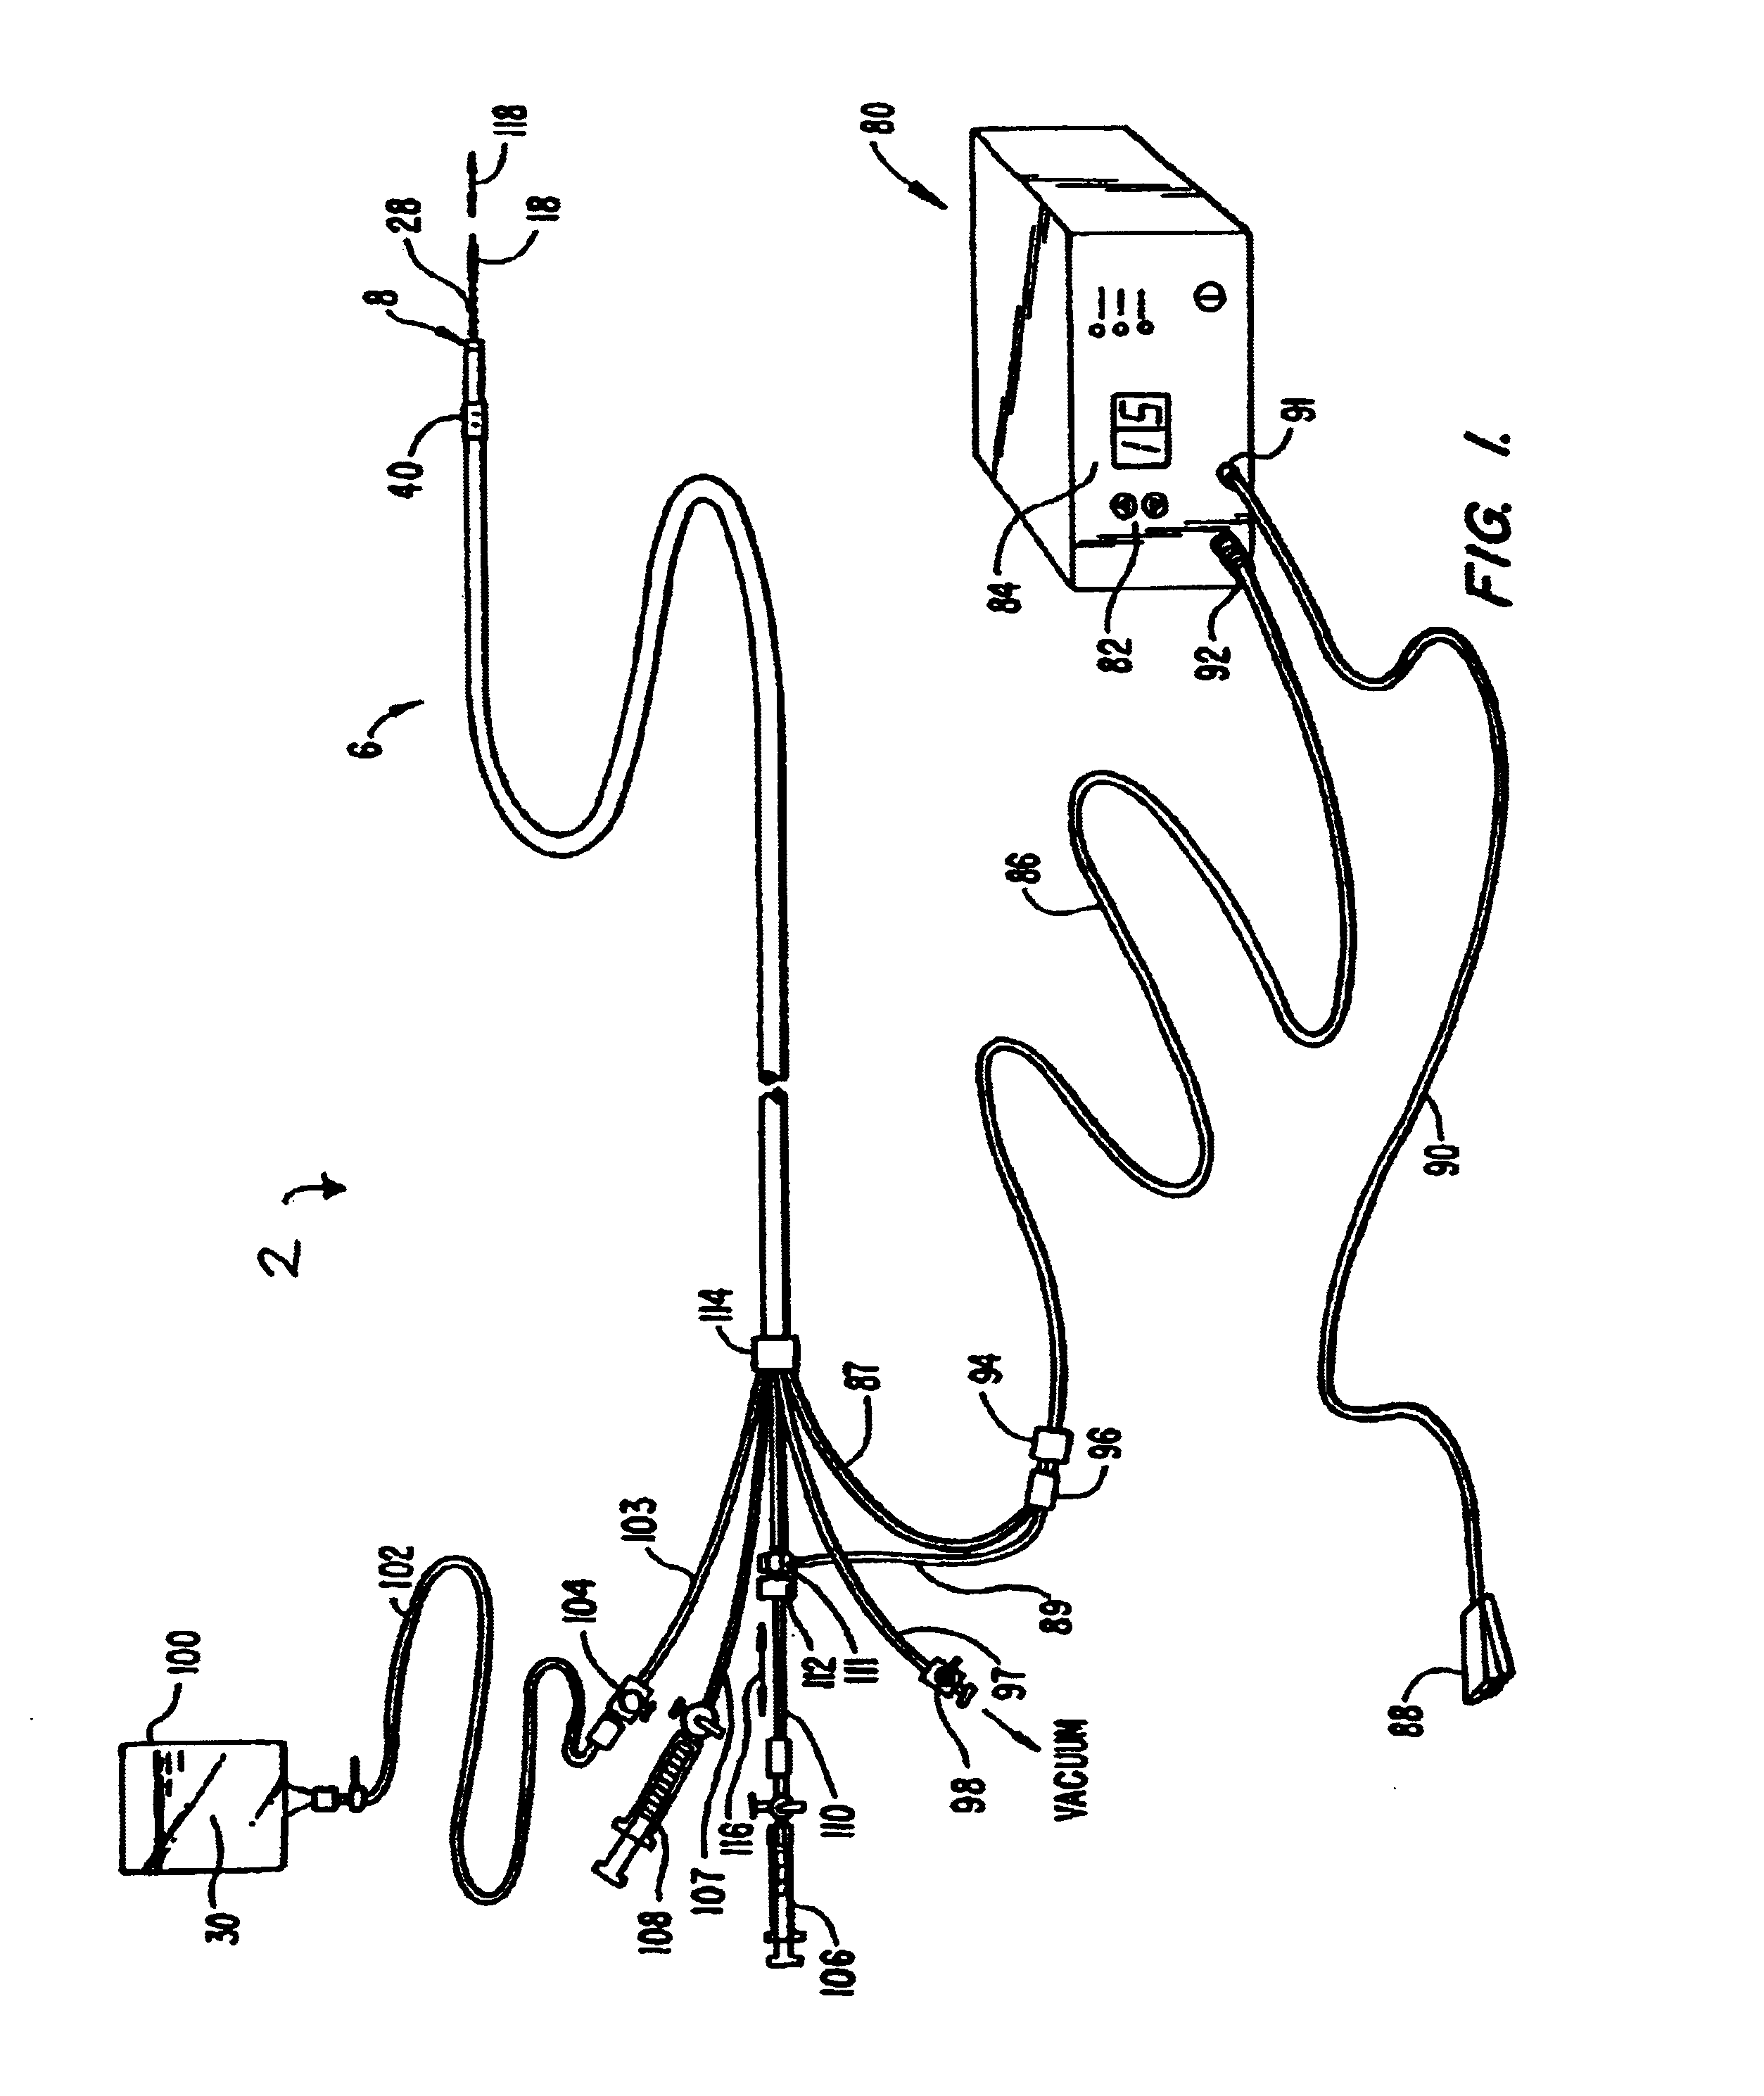 Electrosurgical systems and methods for recanalization of occluded body lumens